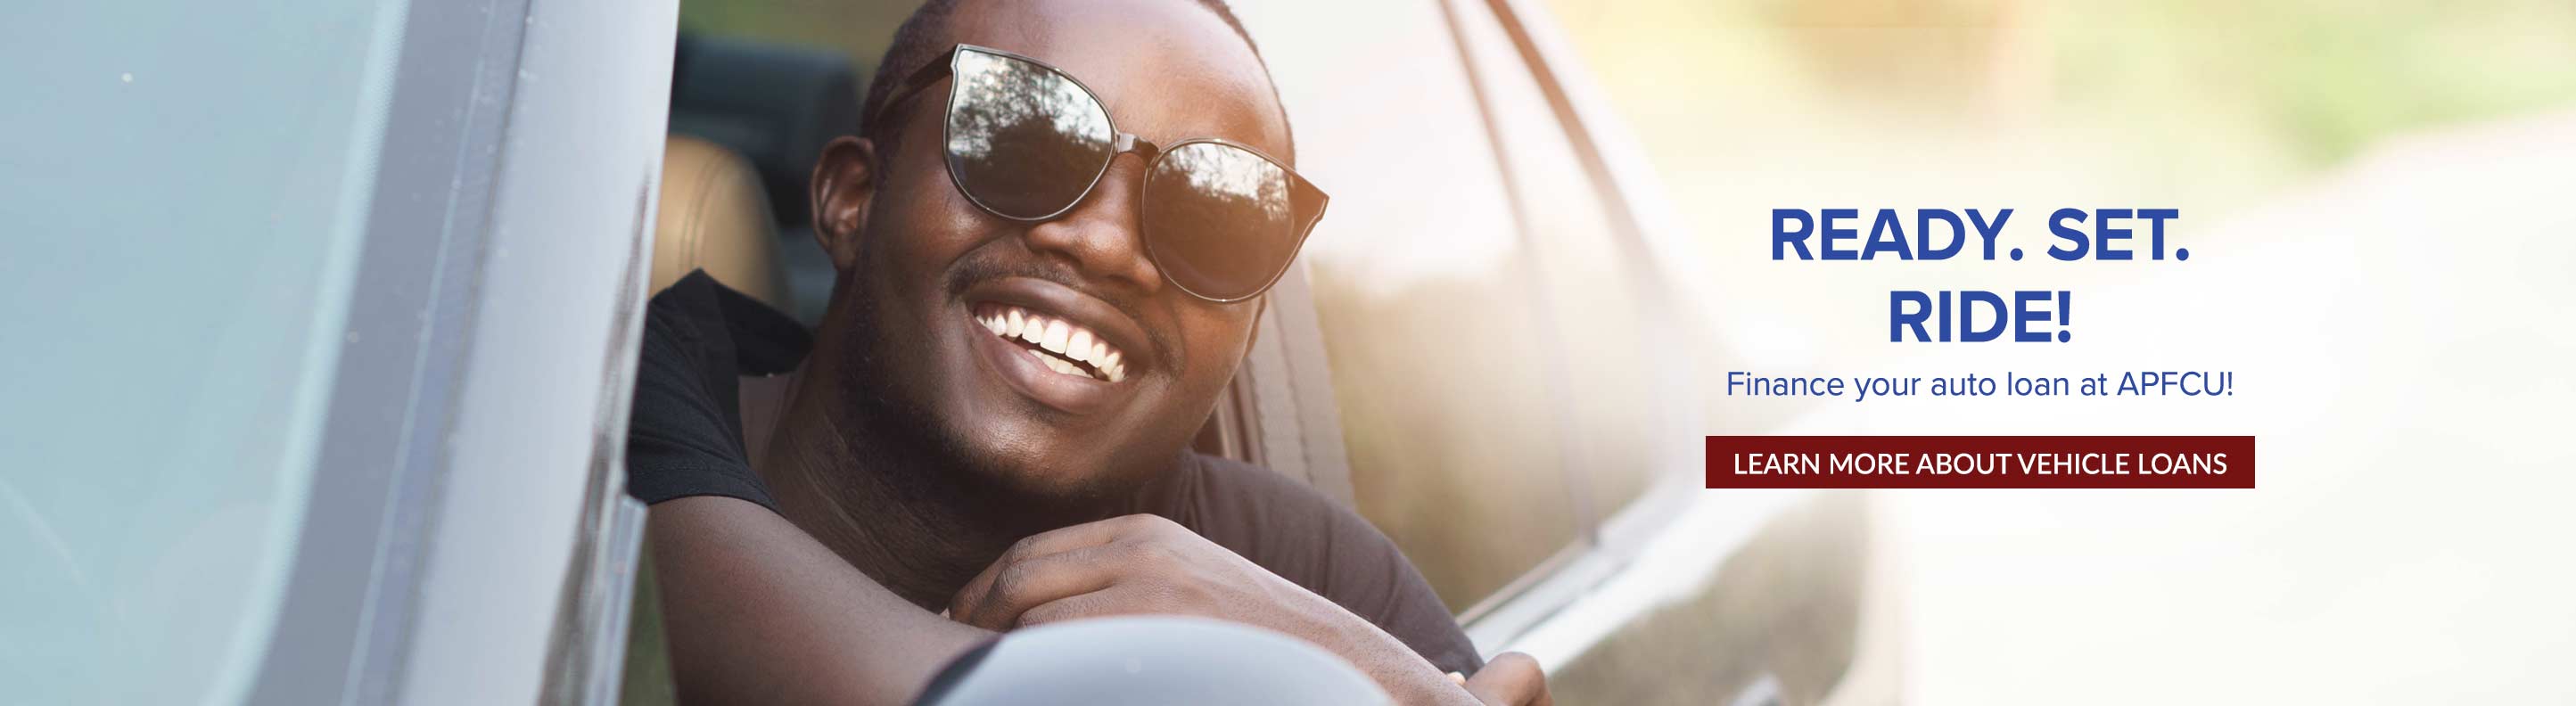 Ready. Set. Ride! Finance your auto loan at APFCU! Learn more about vehicle loans.